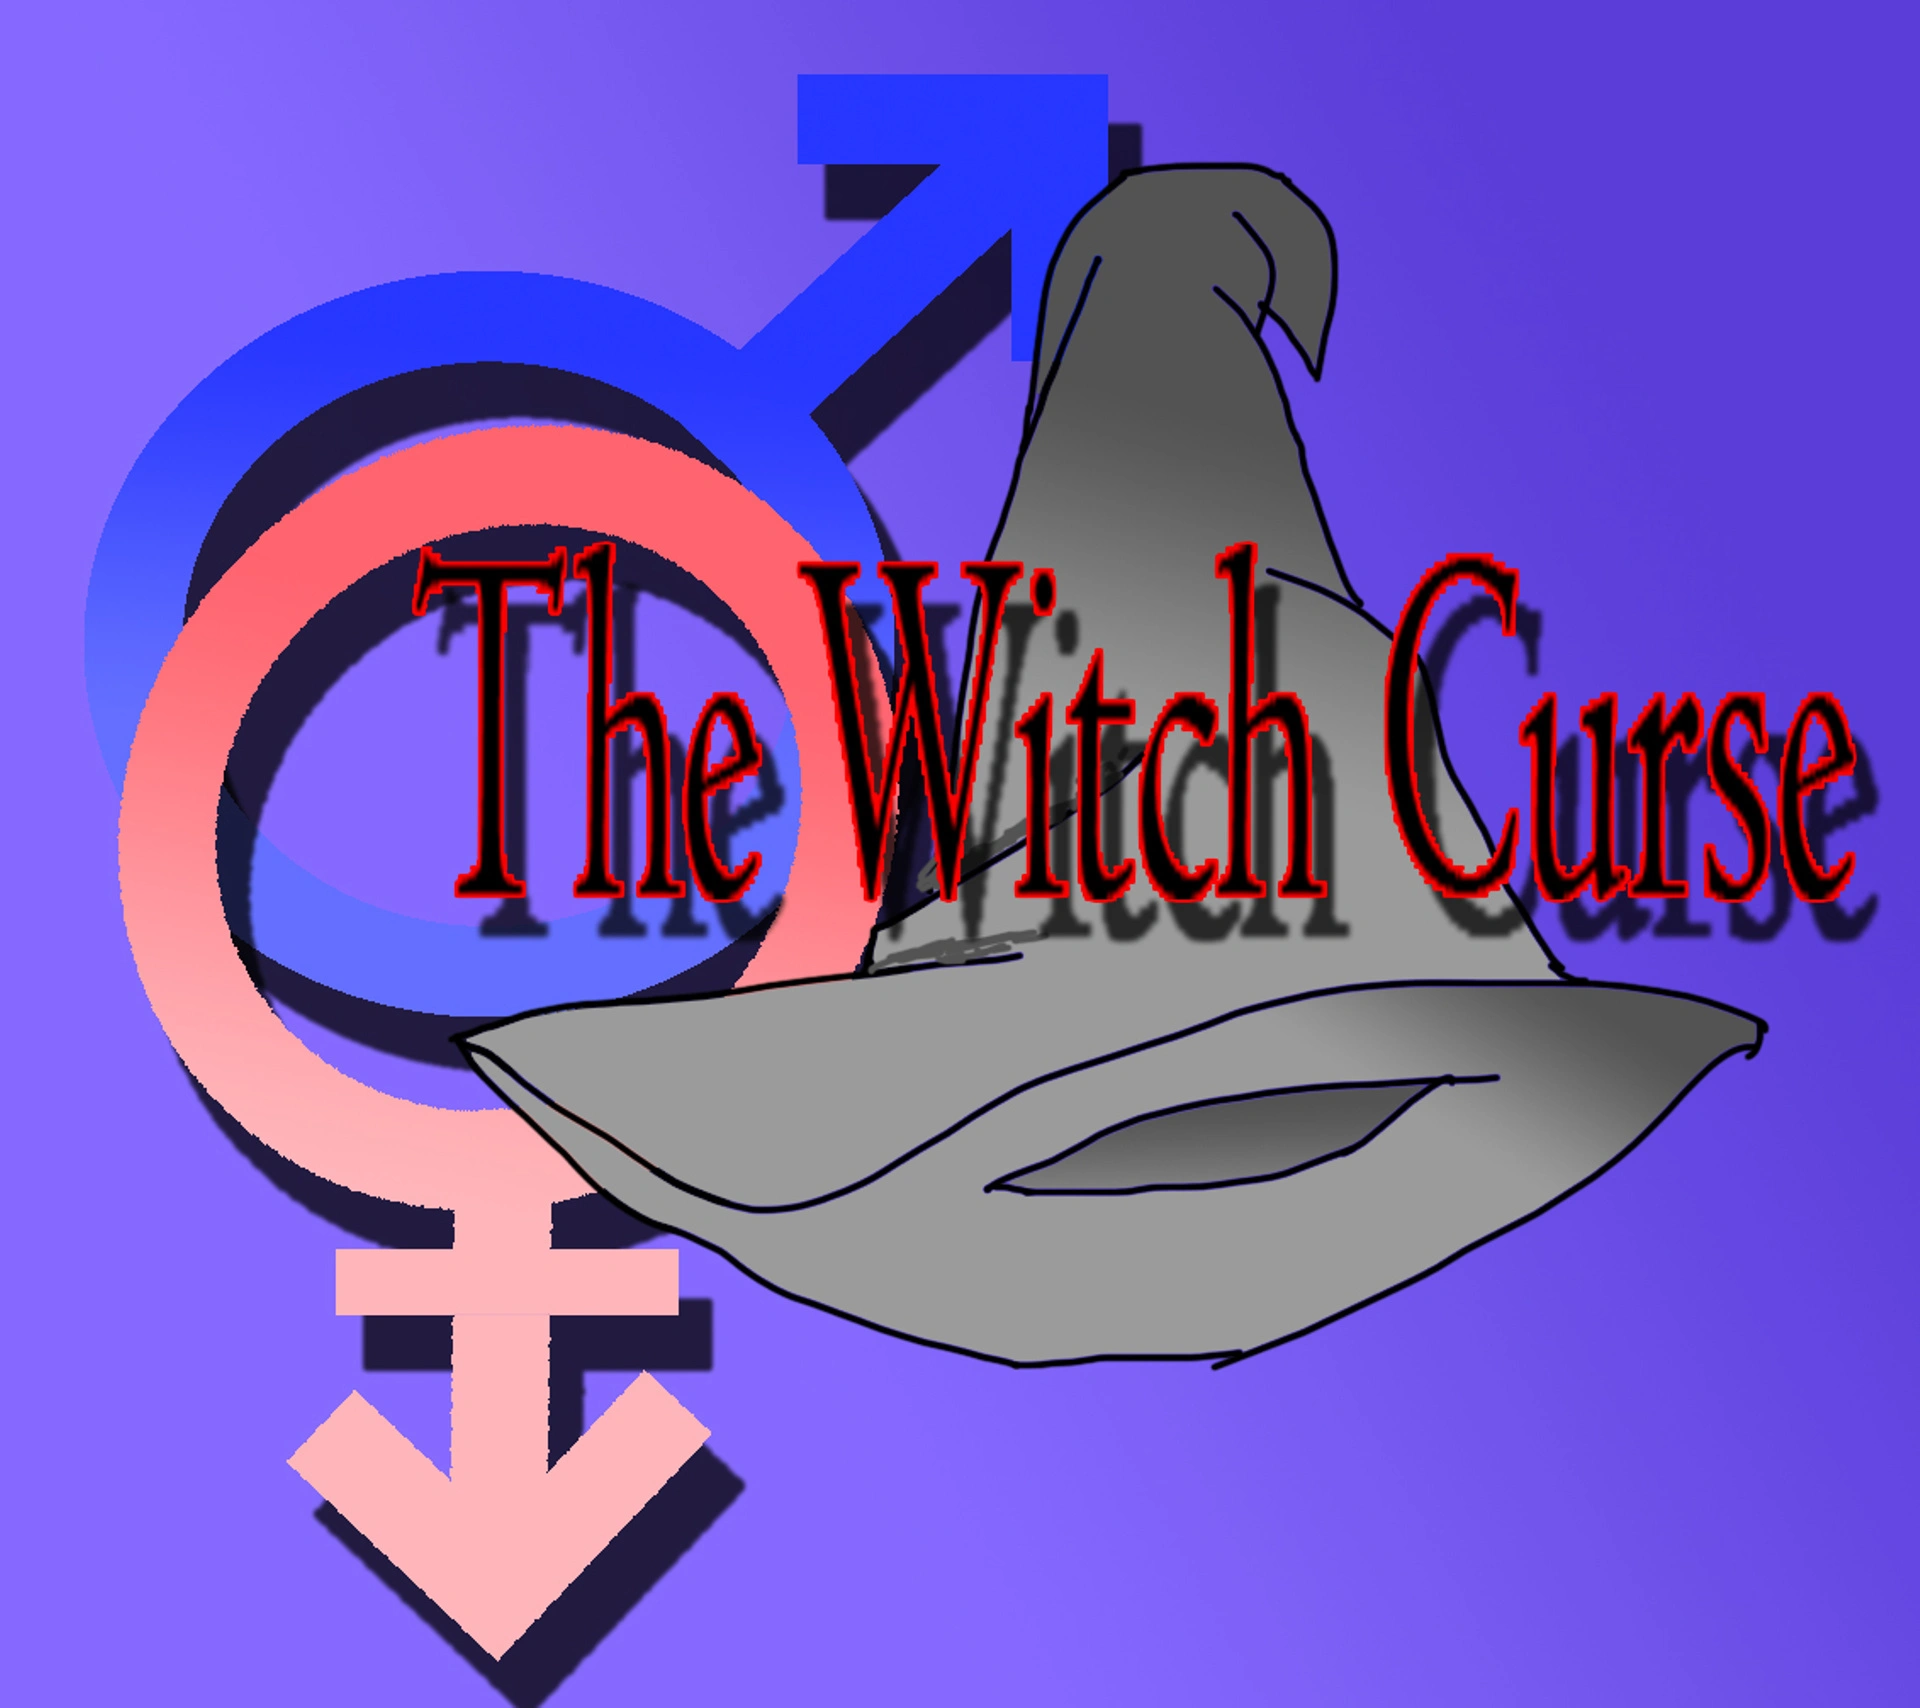 The Witch Curse [v0.1] main image